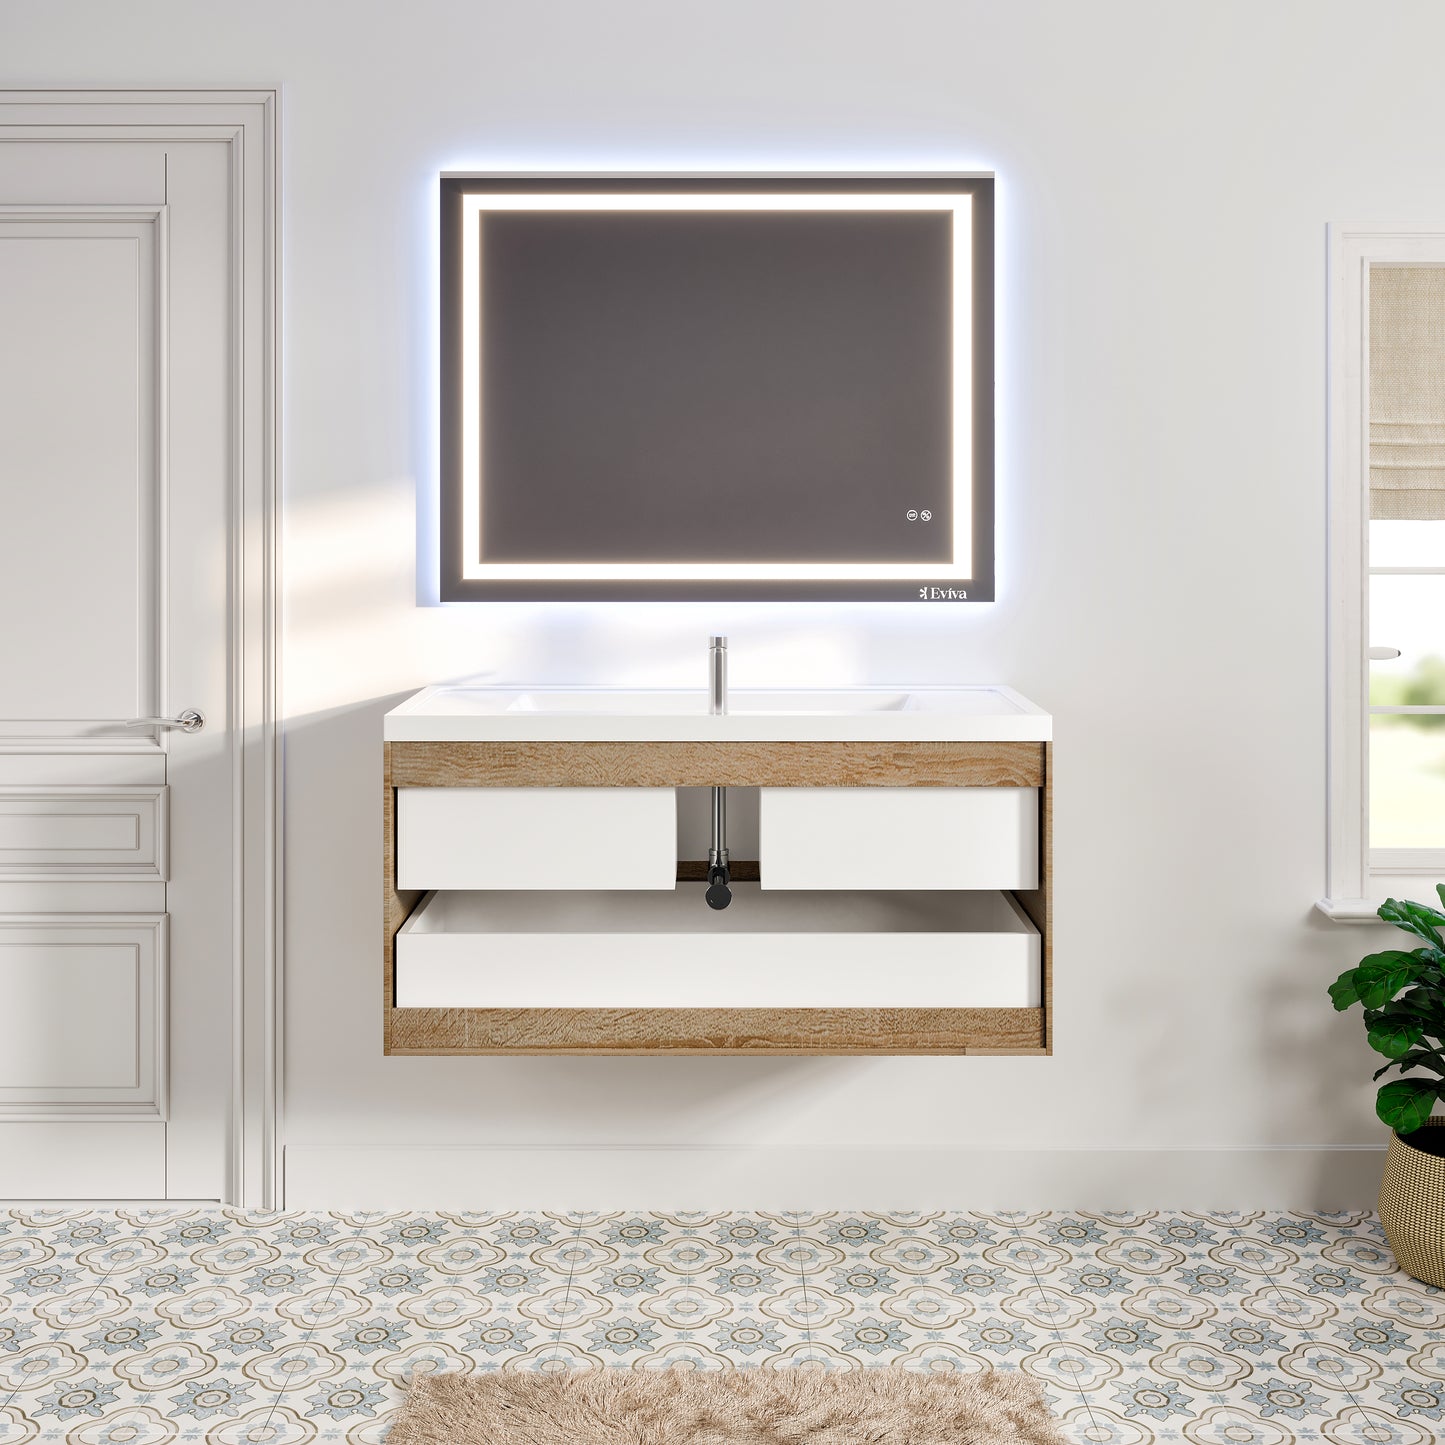 Smile 48"W x 19"D White Oak Bathroom Vanity with Acrylic Countertop and Integrated Sink